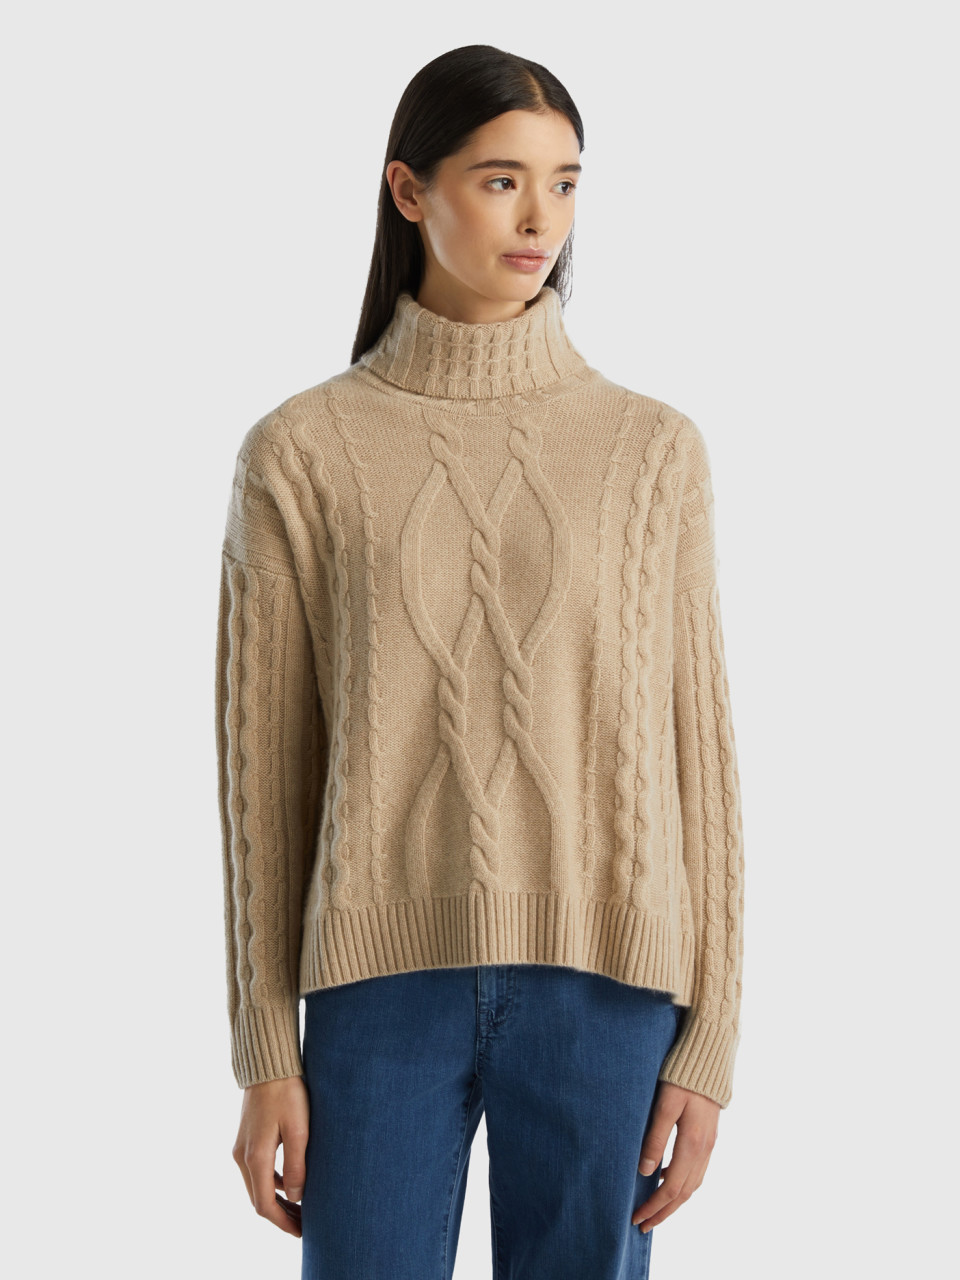 Benetton, Pure Cashmere Turtleneck With Cable Knit, Beige, Women